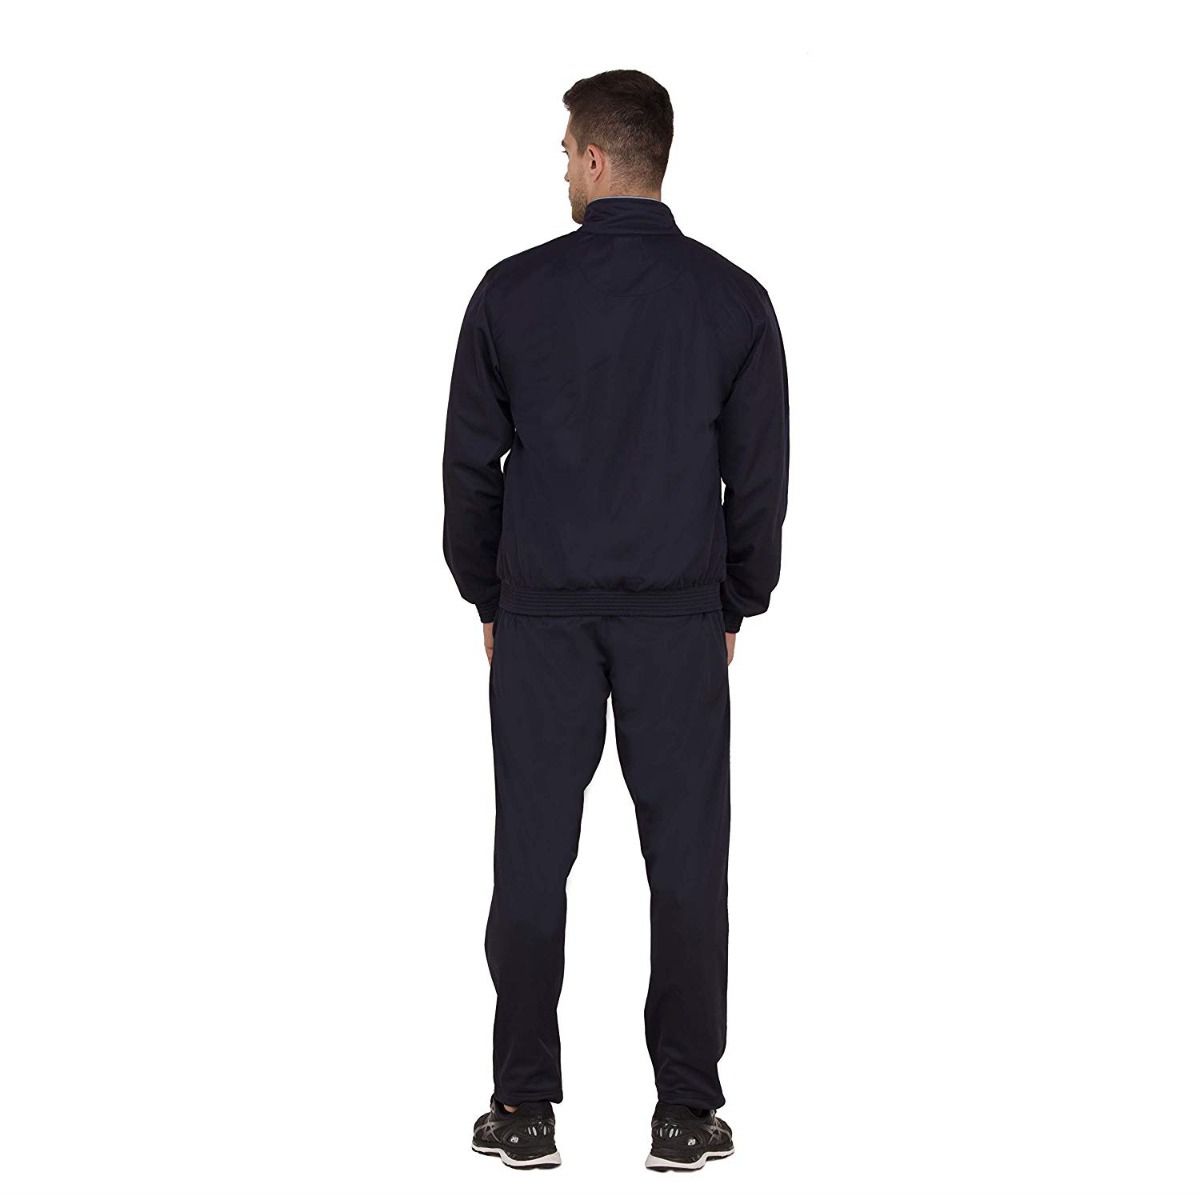 Premium The Indian Army Tracksuit For Men